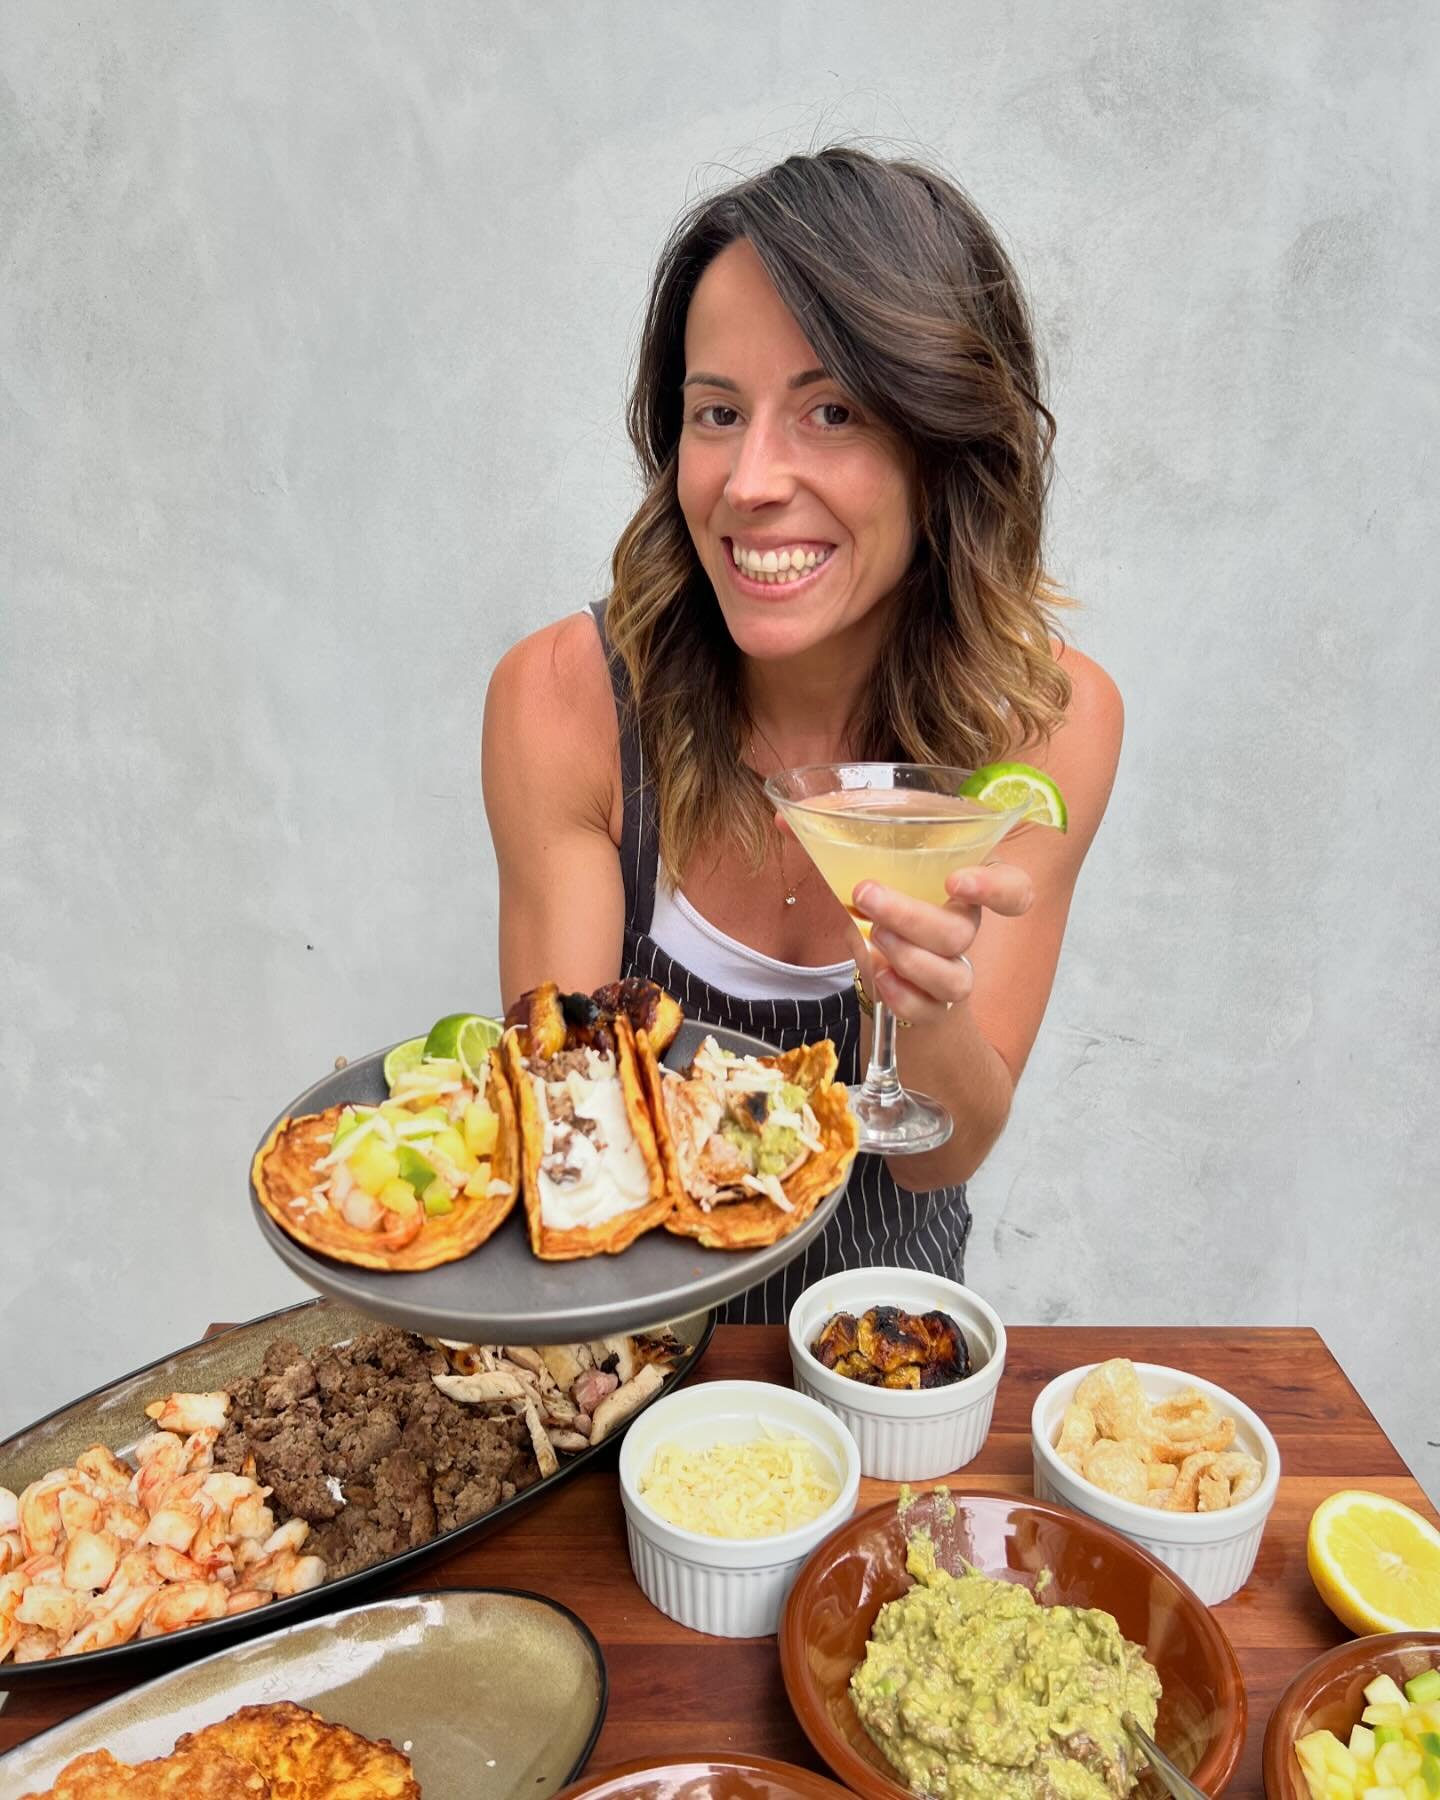 Celebrate Without Compromise: My Animal Based Cinco de Mayo Feast

Why choose between celebration and health?

Check out my Cinco de Mayo spread! What&rsquo;s the ultimate health hack? Make it yourself! By taking control in your kitchen, you&rsquo;re